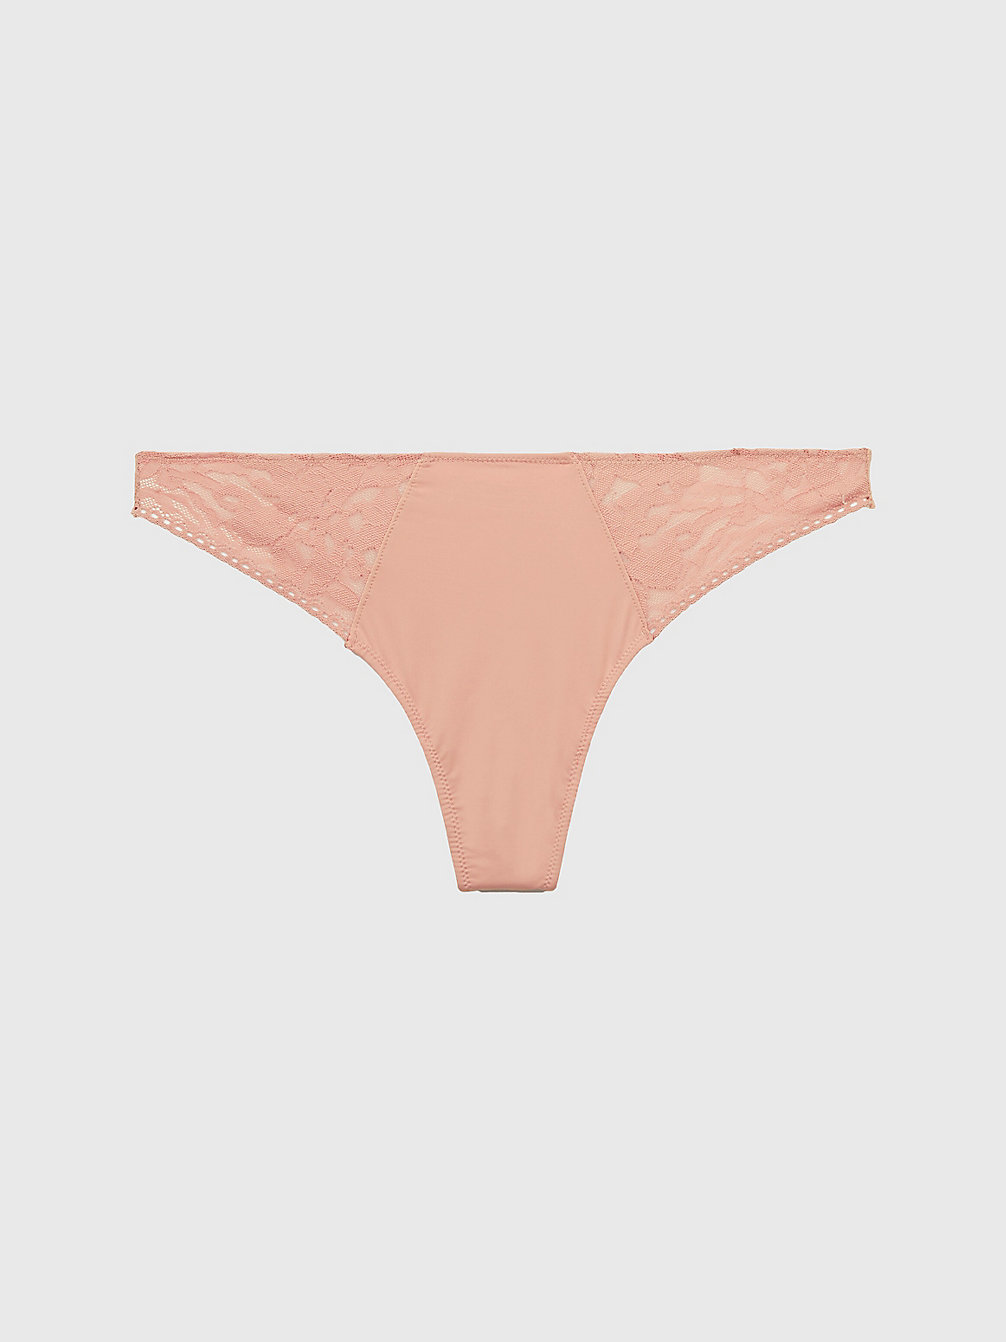 GENTLE Thong - Ultra Soft Lace undefined women Calvin Klein